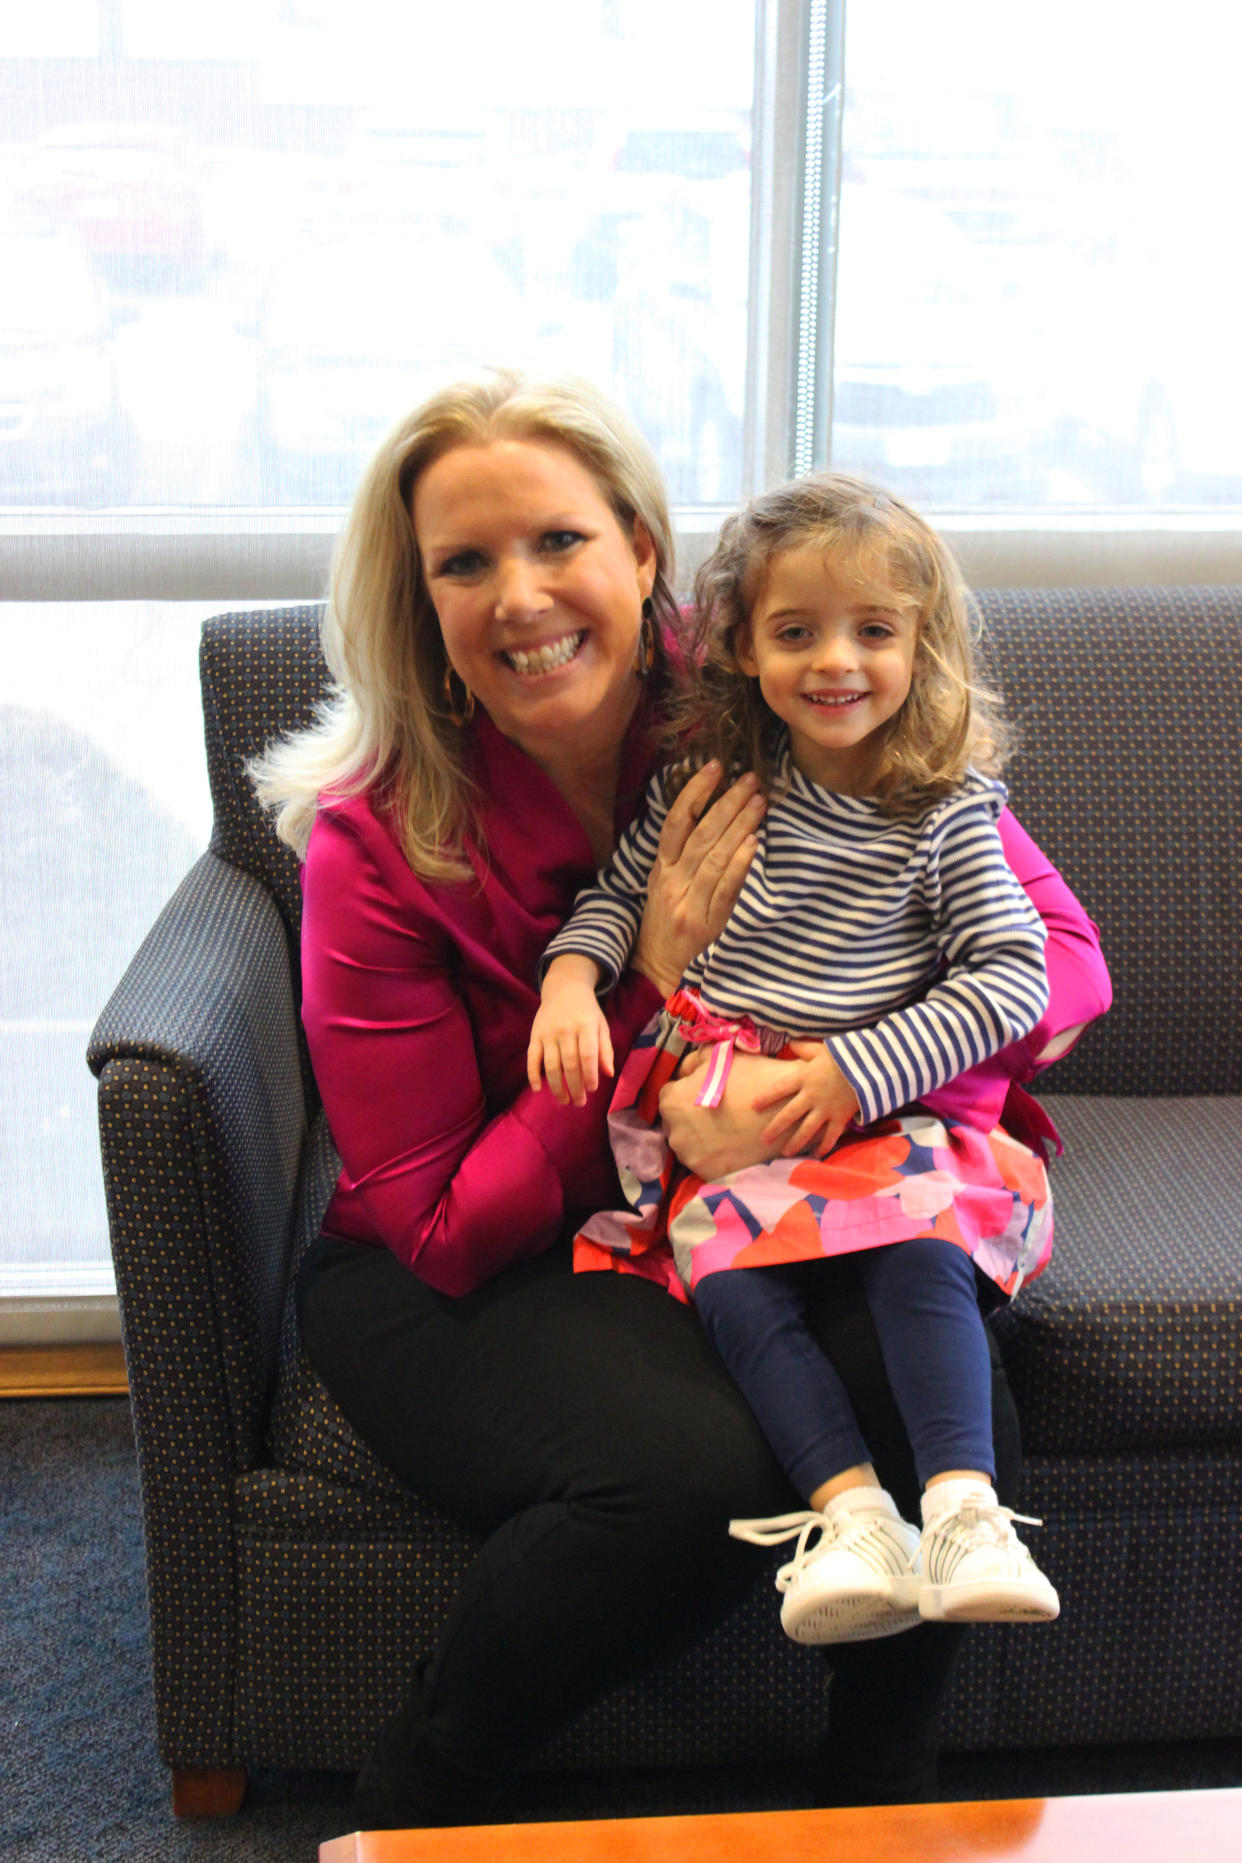 Liz Smith, a nurse from Massachusetts, adopted her now 2-year-old daughter Gisele after meeting the premature baby in her own hospital. Gisele didn’t have visitors for five months. (Photo: Franciscan Children’s Hospital)